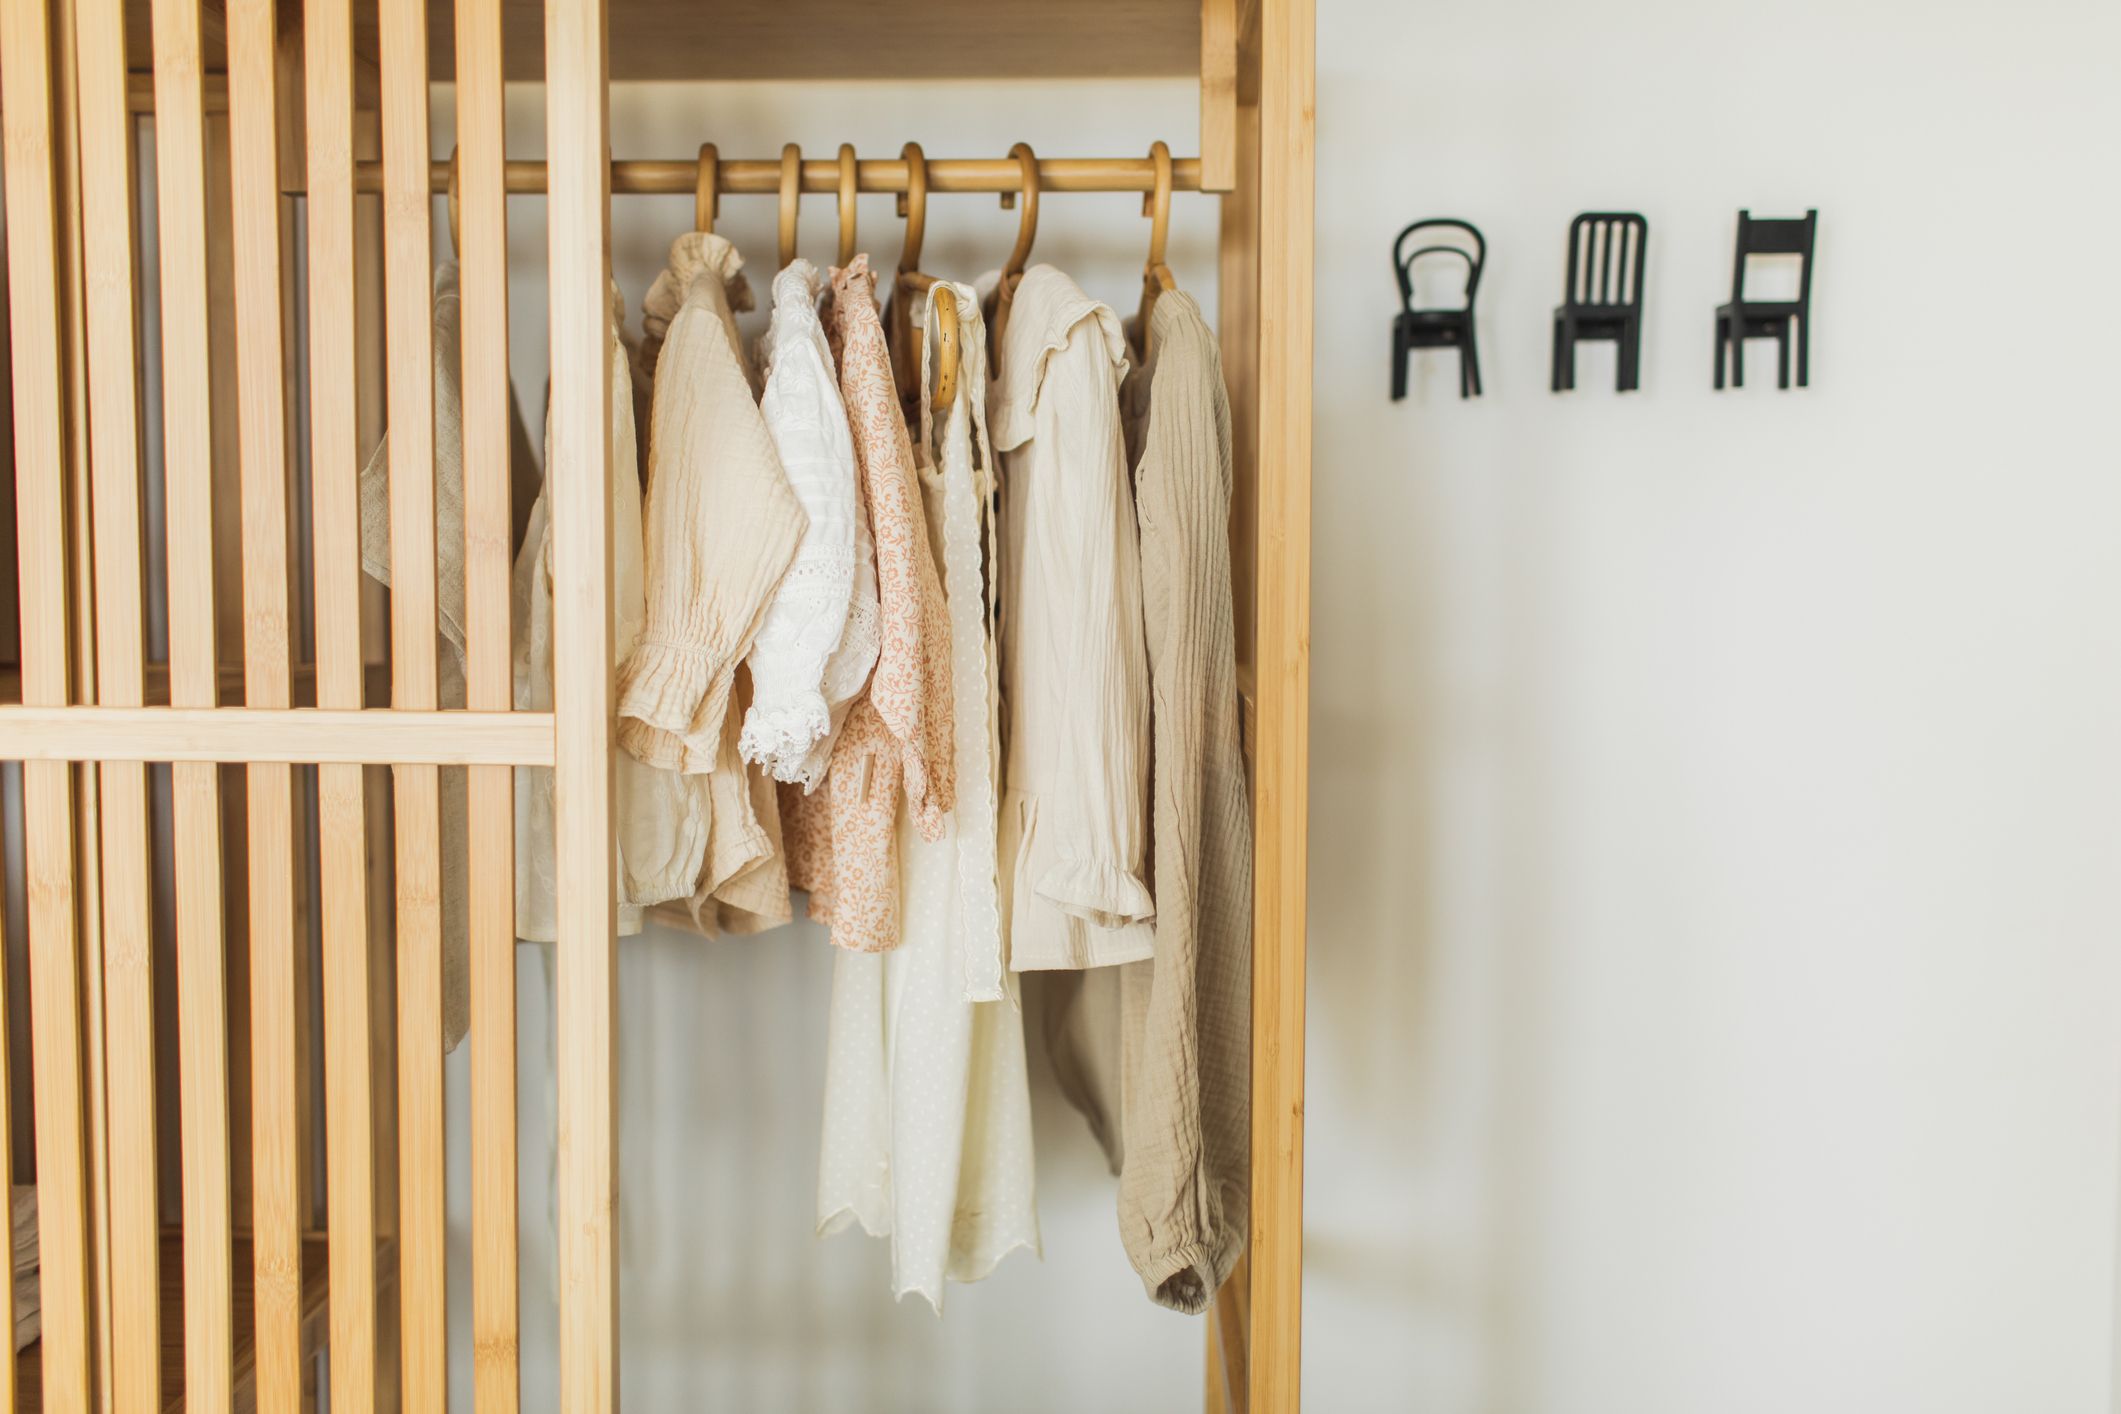 How to get your wardrobe ready for spring - clothes care